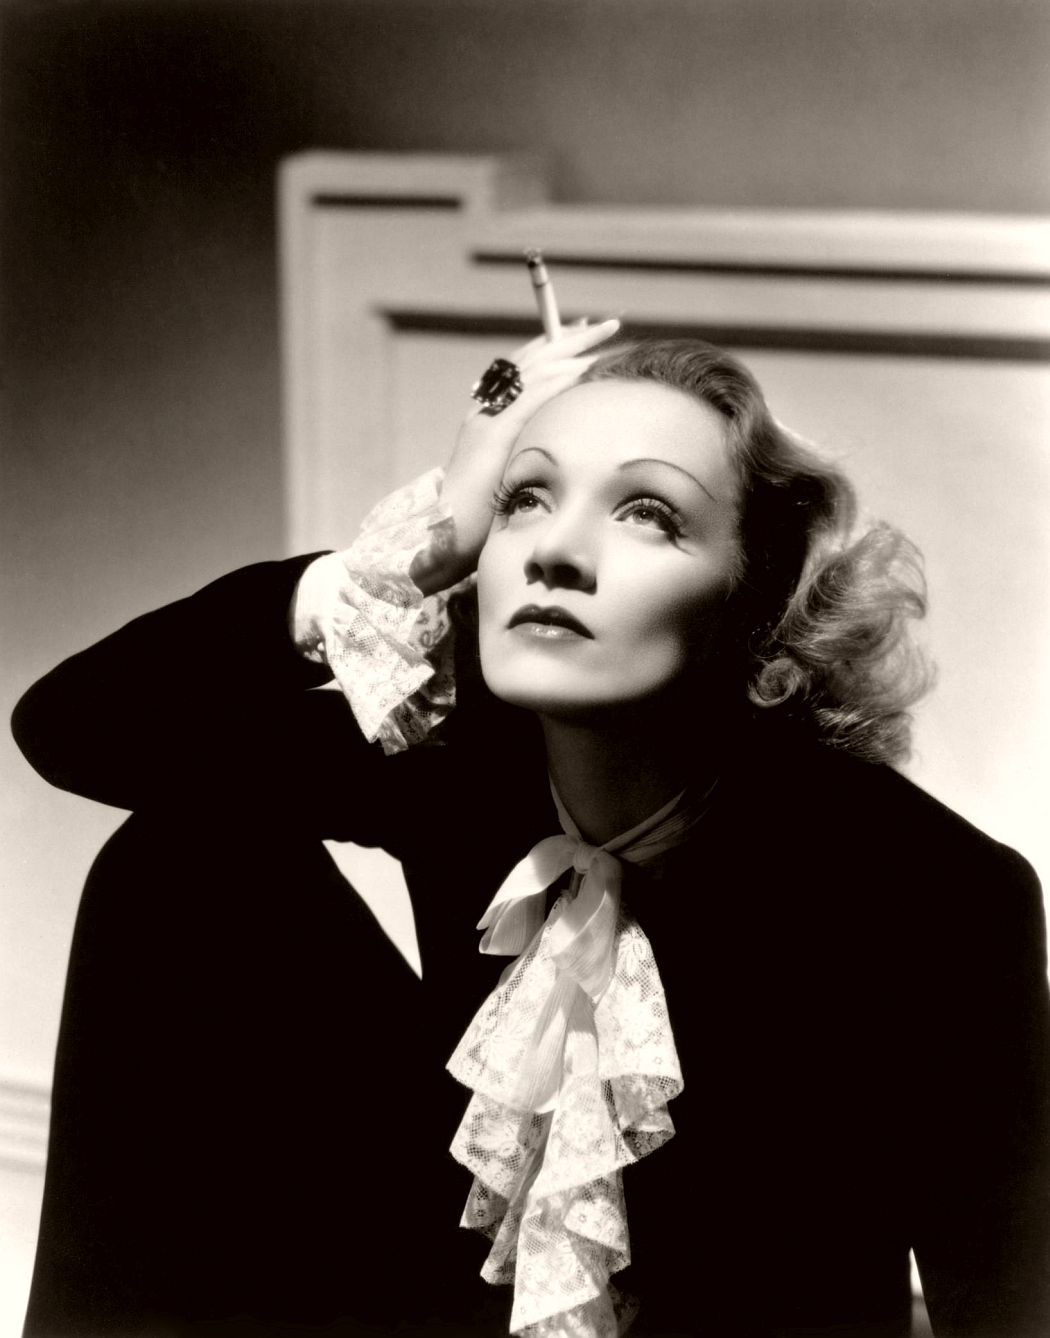 Another actress who defied the pressures of Hollywood was Marlene Dietrich who is famous (among other things) for saying: ‘I dress for myself. Not for the image, not for the public, not for fashion, not for men.’ While also a fan of the humble ball gown, Marlene became the first famous woman in history to rock a tuxedo, with Angelina Jolie and co. taking suit (pun intended) all these years later. We applaud you, Marlene. 1930s fashion trends truly wouldn’t have been the same with her.